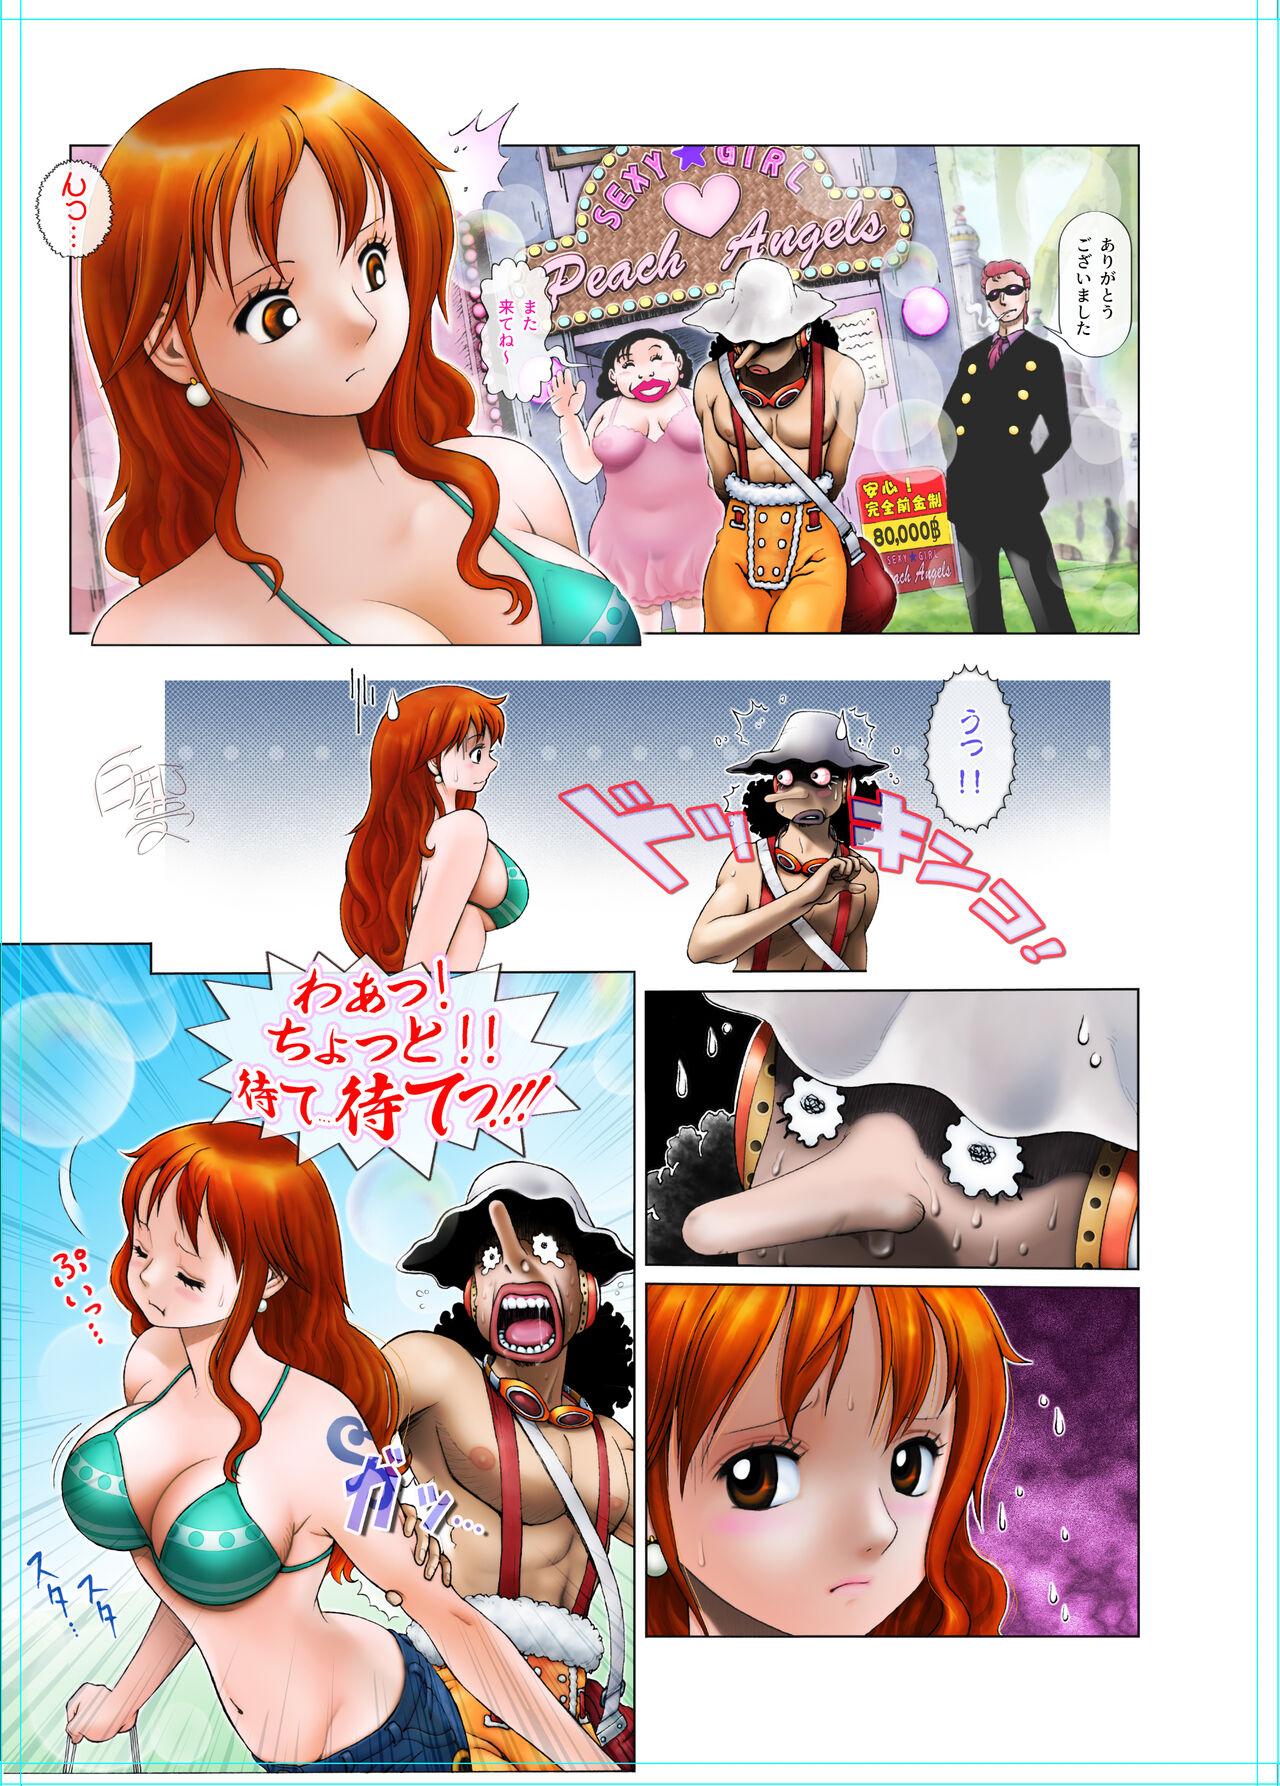 Facials WIP Doujin by Deadlock8383 - One piece Love Making - Picture 2